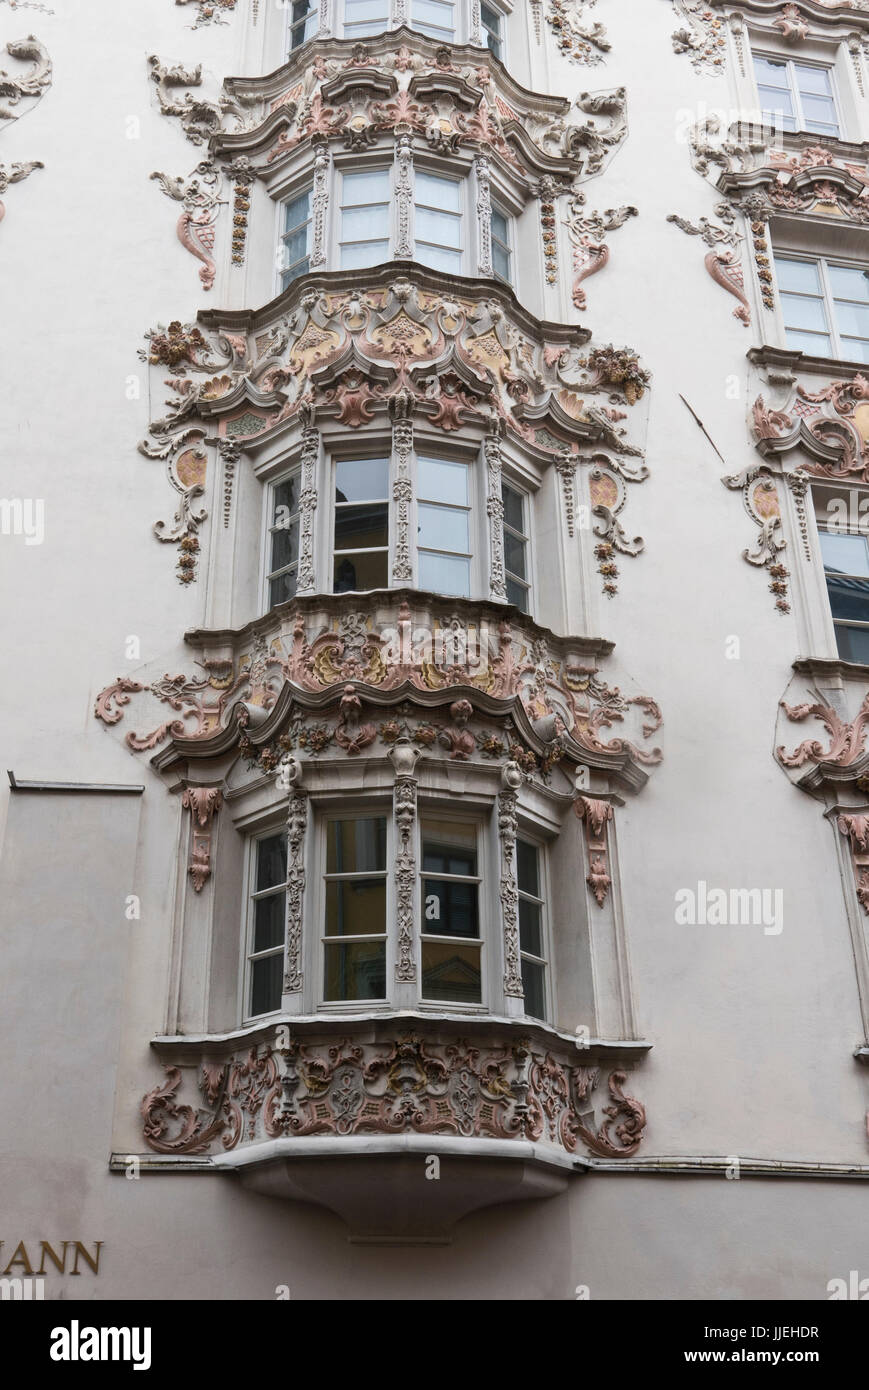 The exterior of Helbling House, Old Town, Innsbruck, Austria Stock Photo